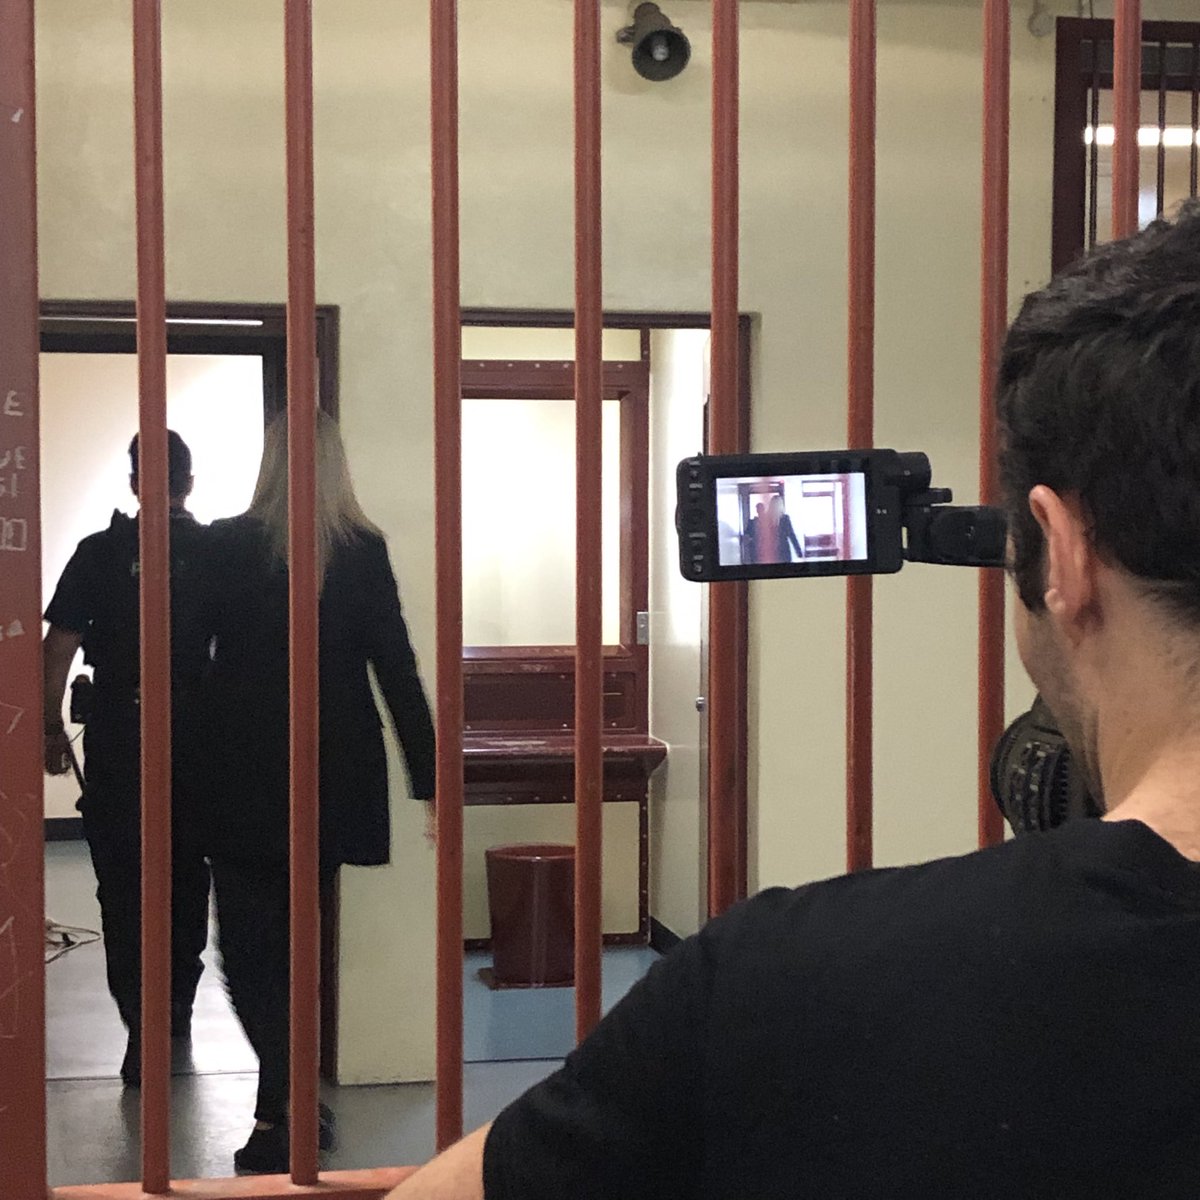 A day behind bars as we film the latest instalment in @qldsac⁩  interactive court series #judgeforyourself #wheredidiputthekey  sentencingcouncil.qld.gov.au